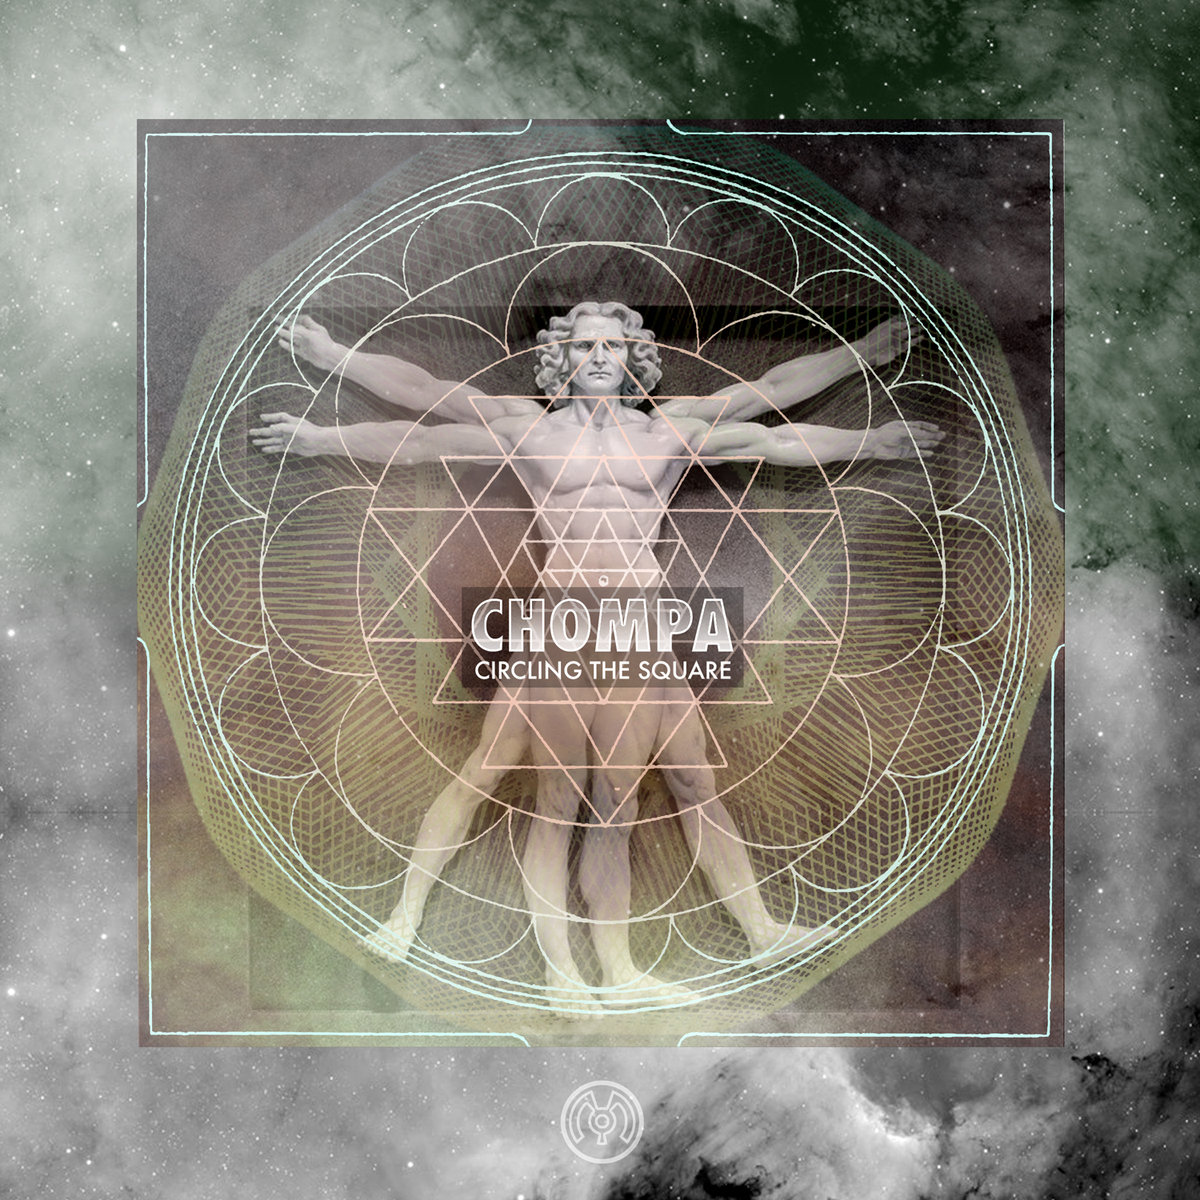 Chompa - Circling the Square @ 'Circling the Square' album (electronic, dubstep)